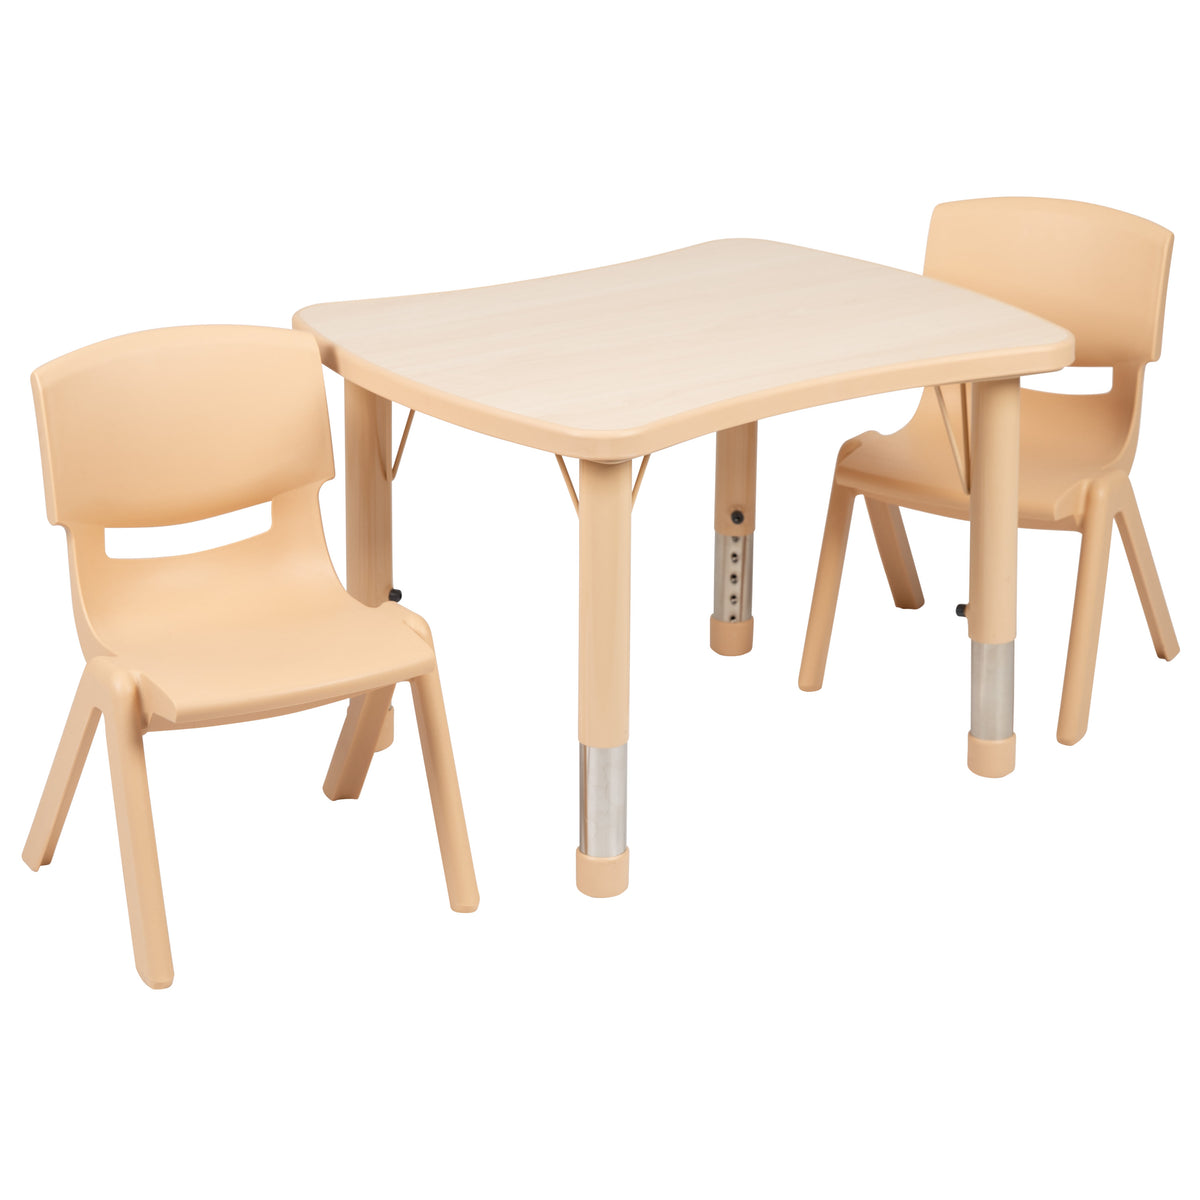 Natural |#| 21.875inchW x 26.625inchL Rectangle Natural Plastic Activity Table Set with 2 Chairs